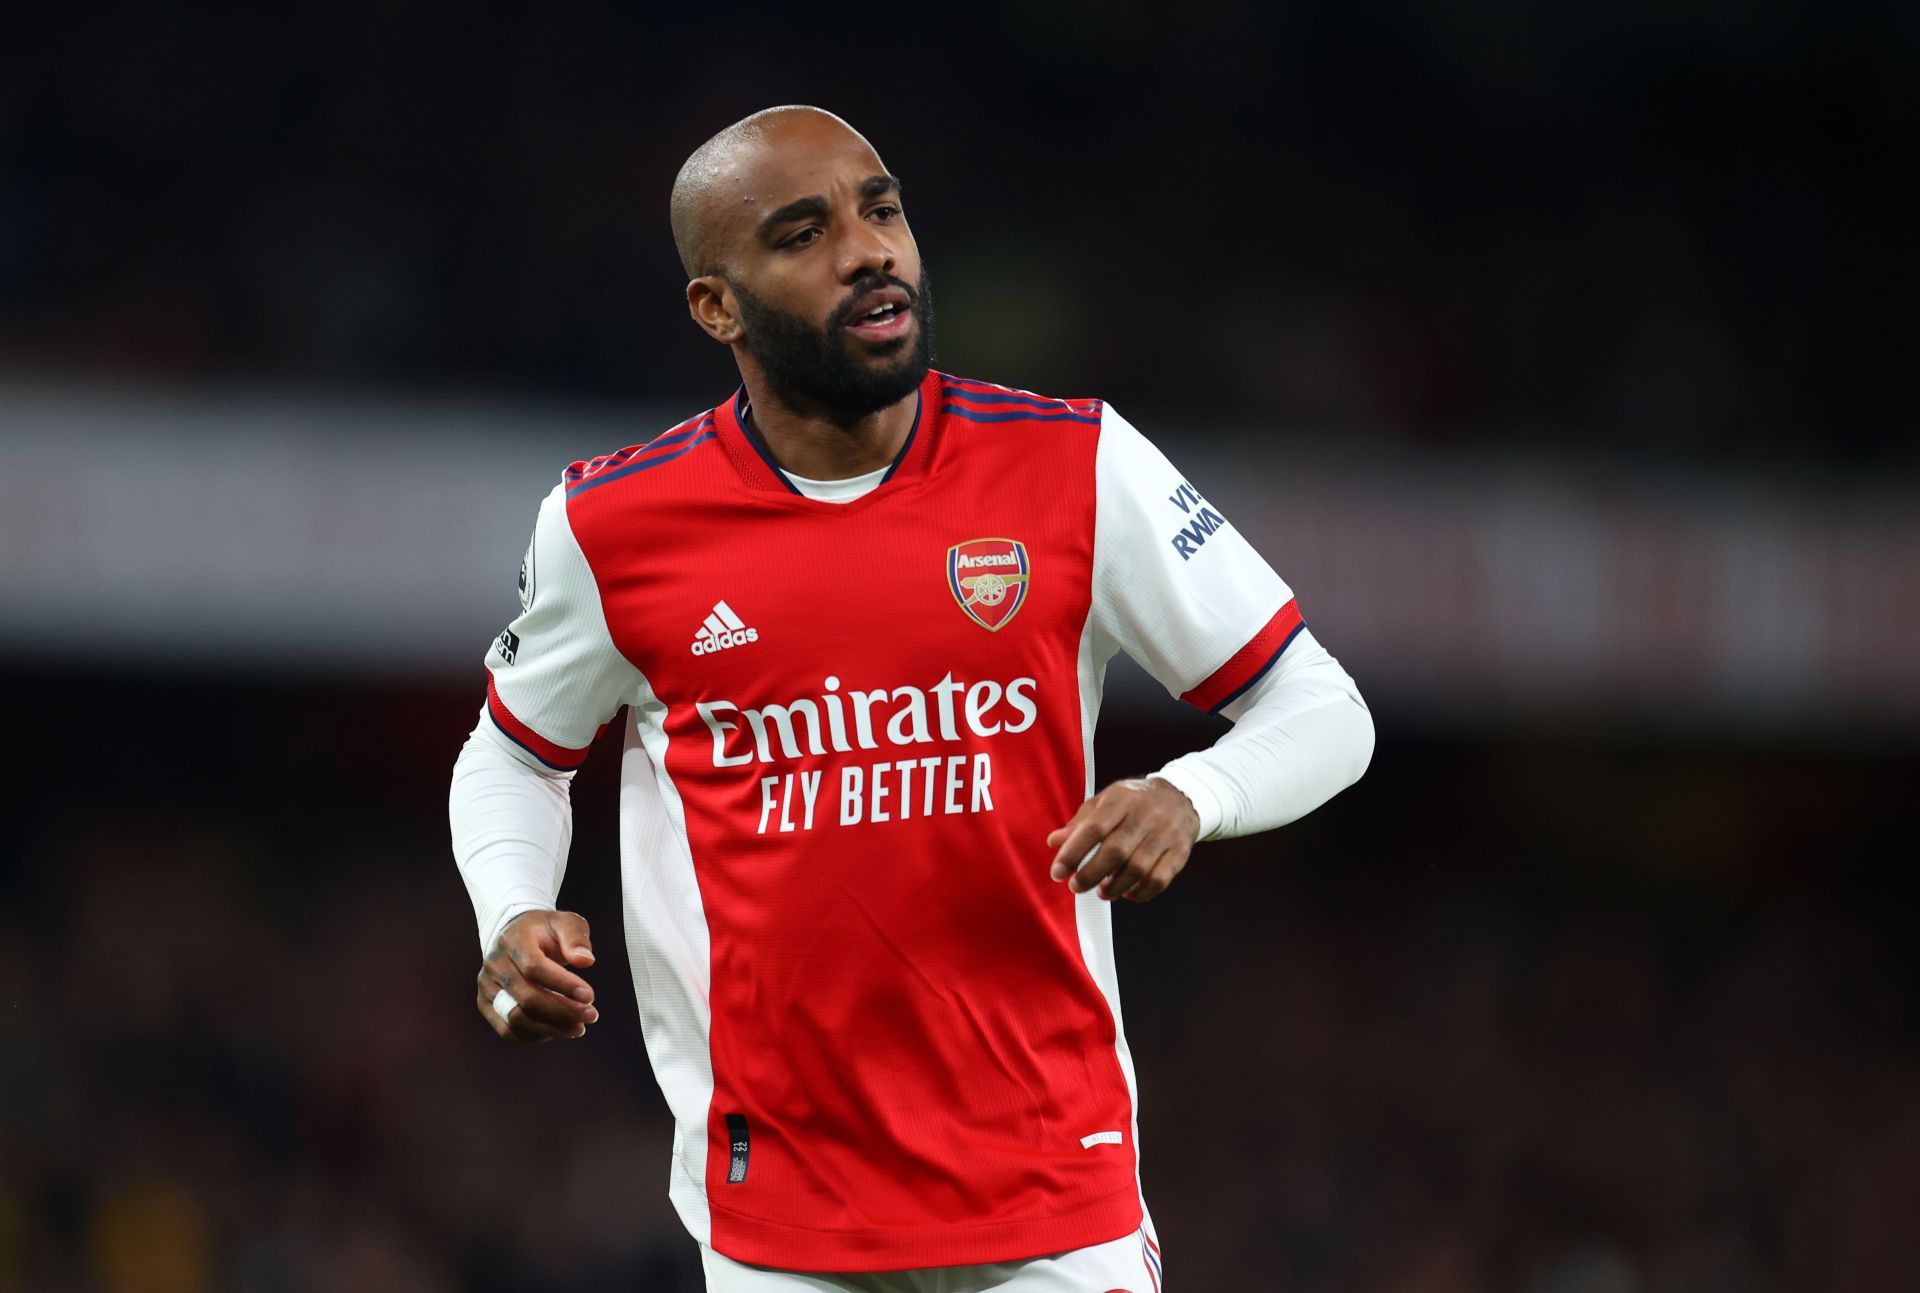 Martin Keown believes Arsenal should hold on to Alexandre Lacazette.